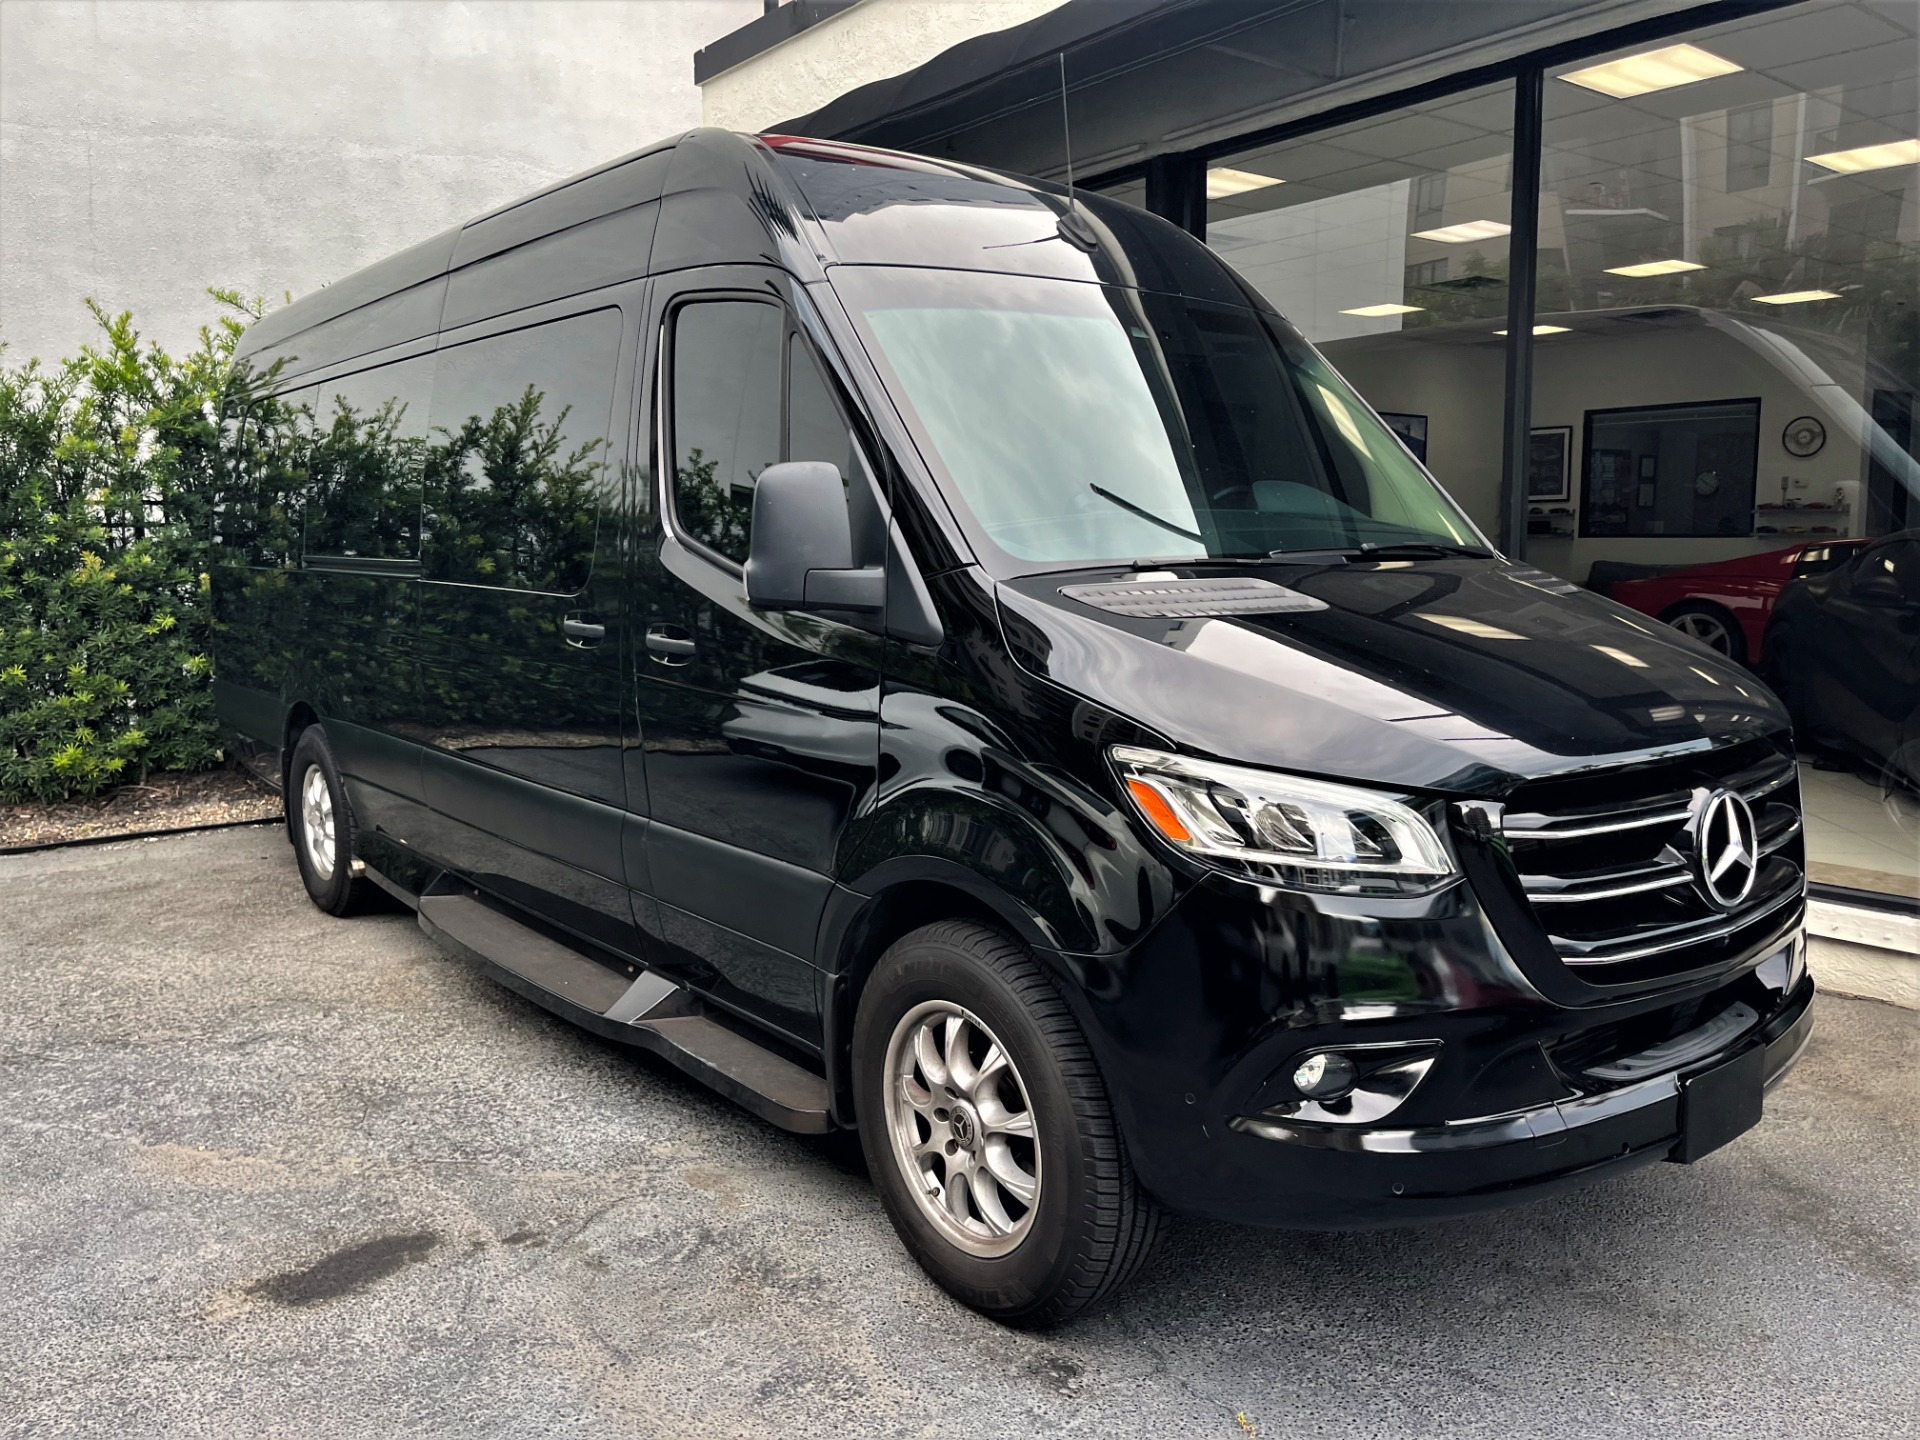 Used 2020 Mercedes-Benz Sprinter Cargo 3500 for sale $239,850 at The Gables Sports Cars in Miami FL 33146 1